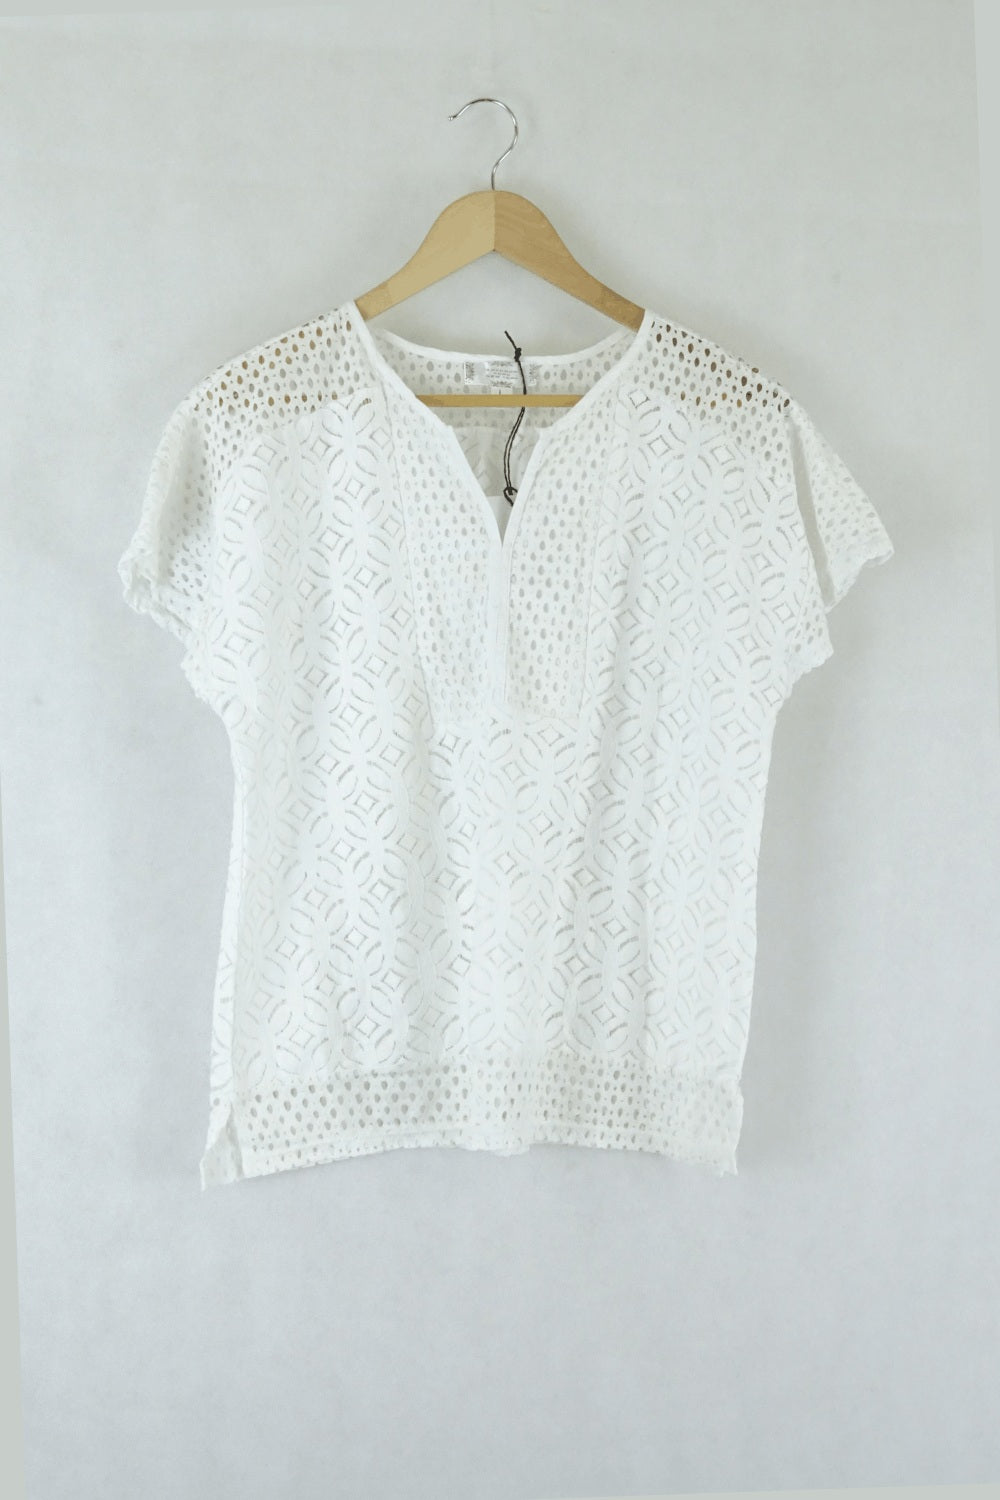 Shannon Ford White Lace Top L